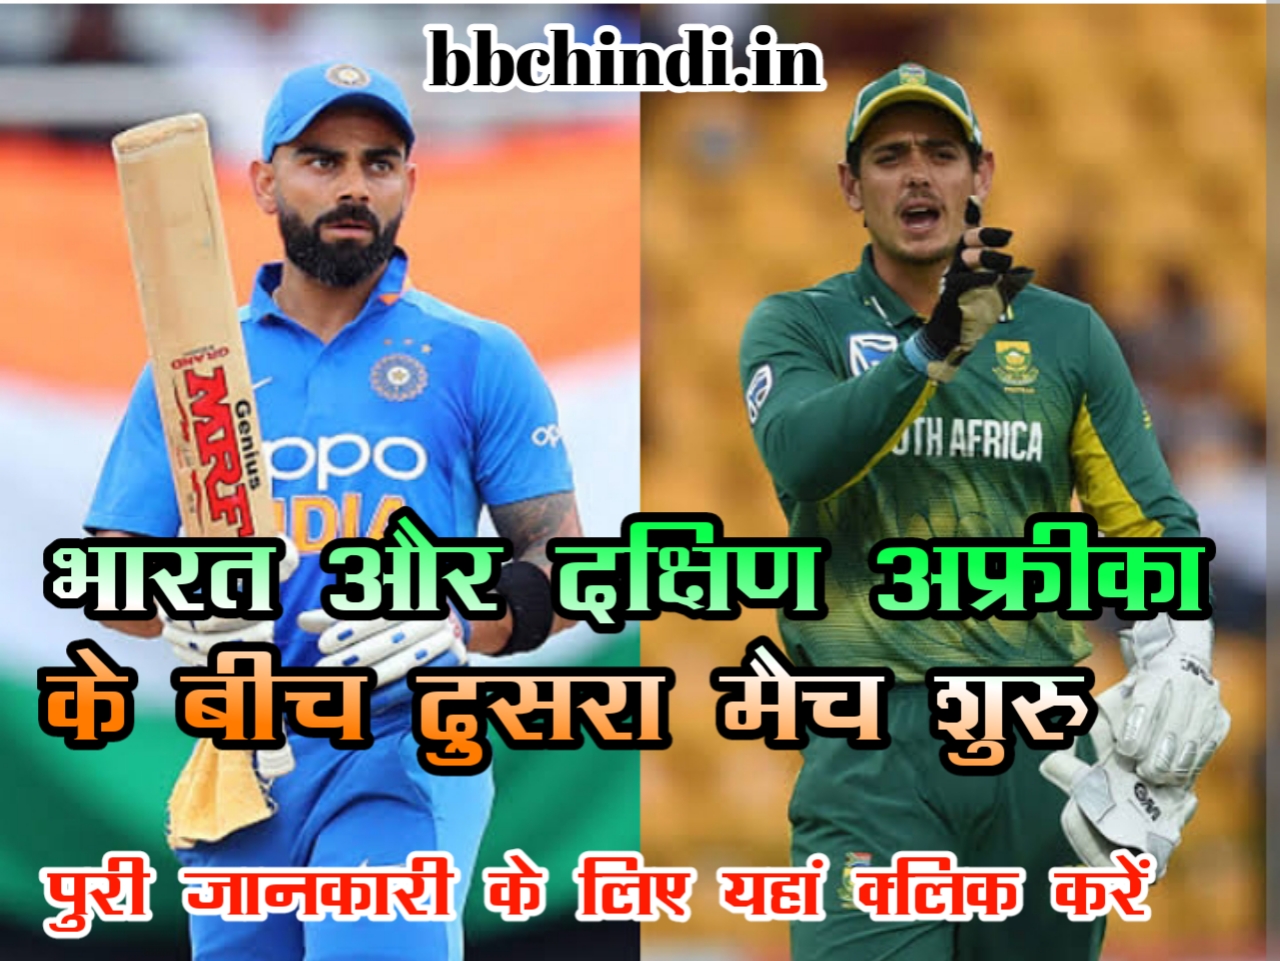 south africa national cricket team india,